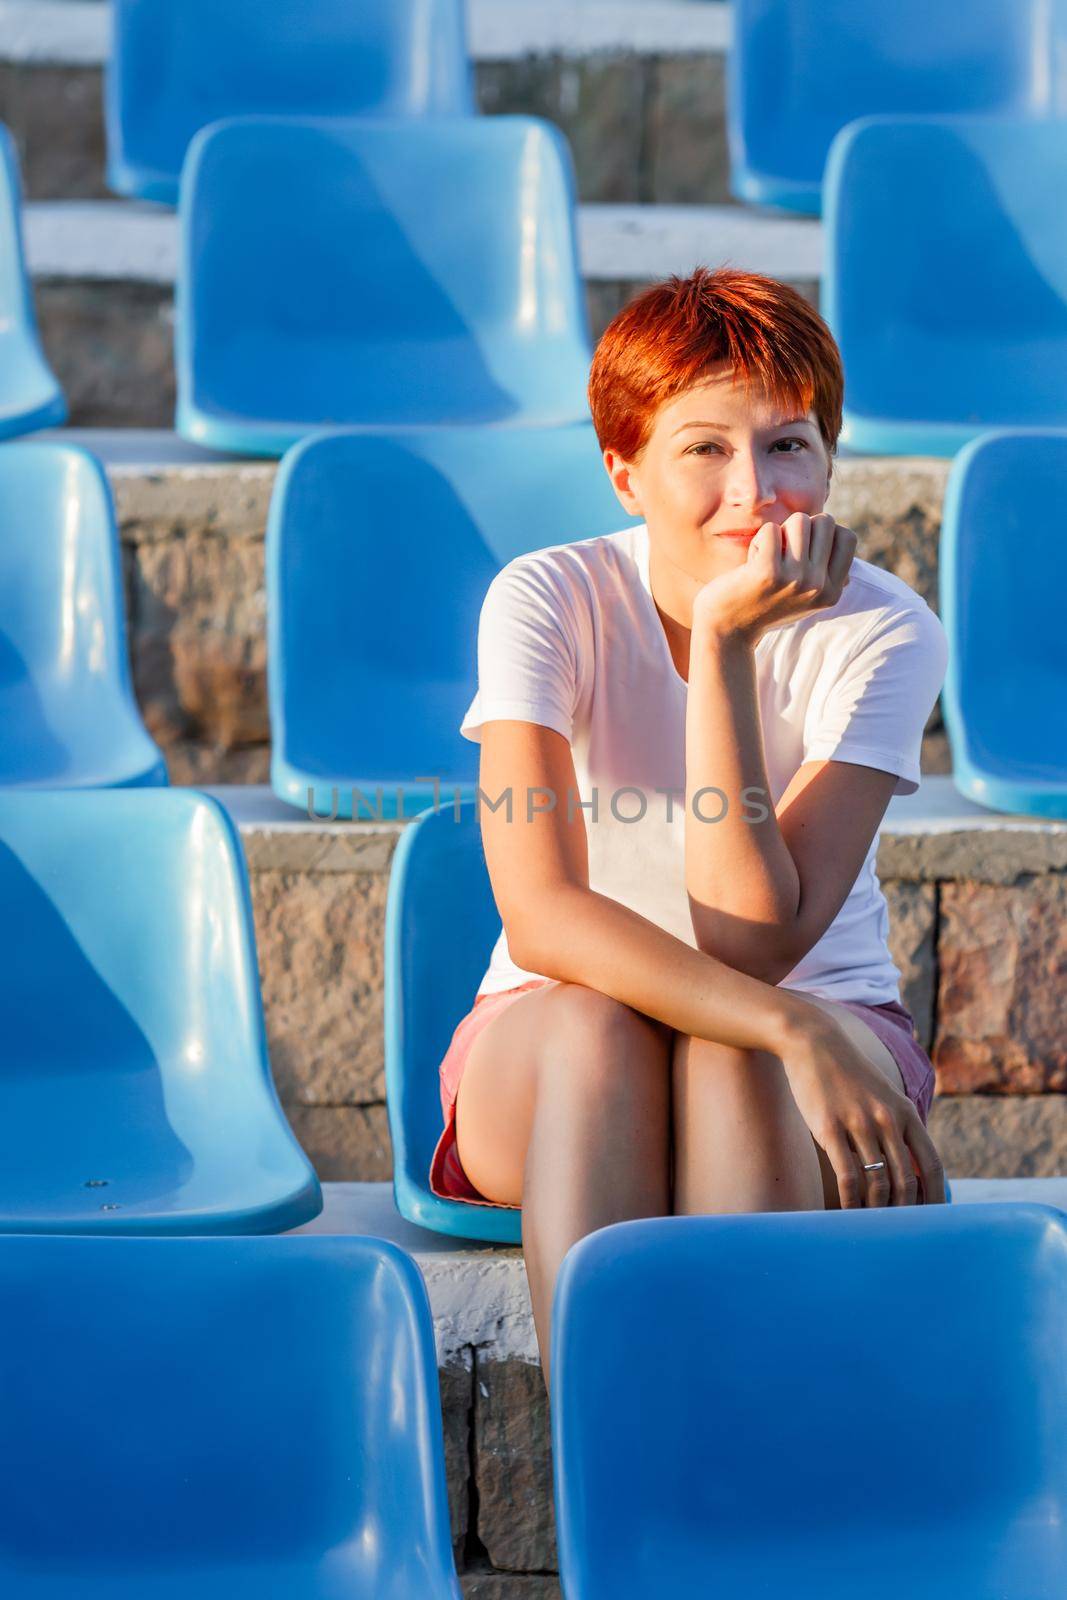 Young woman with short red hair sits relaxed in deserted open air audience. Summer vibes. Sport stadium with plastic blue seats.